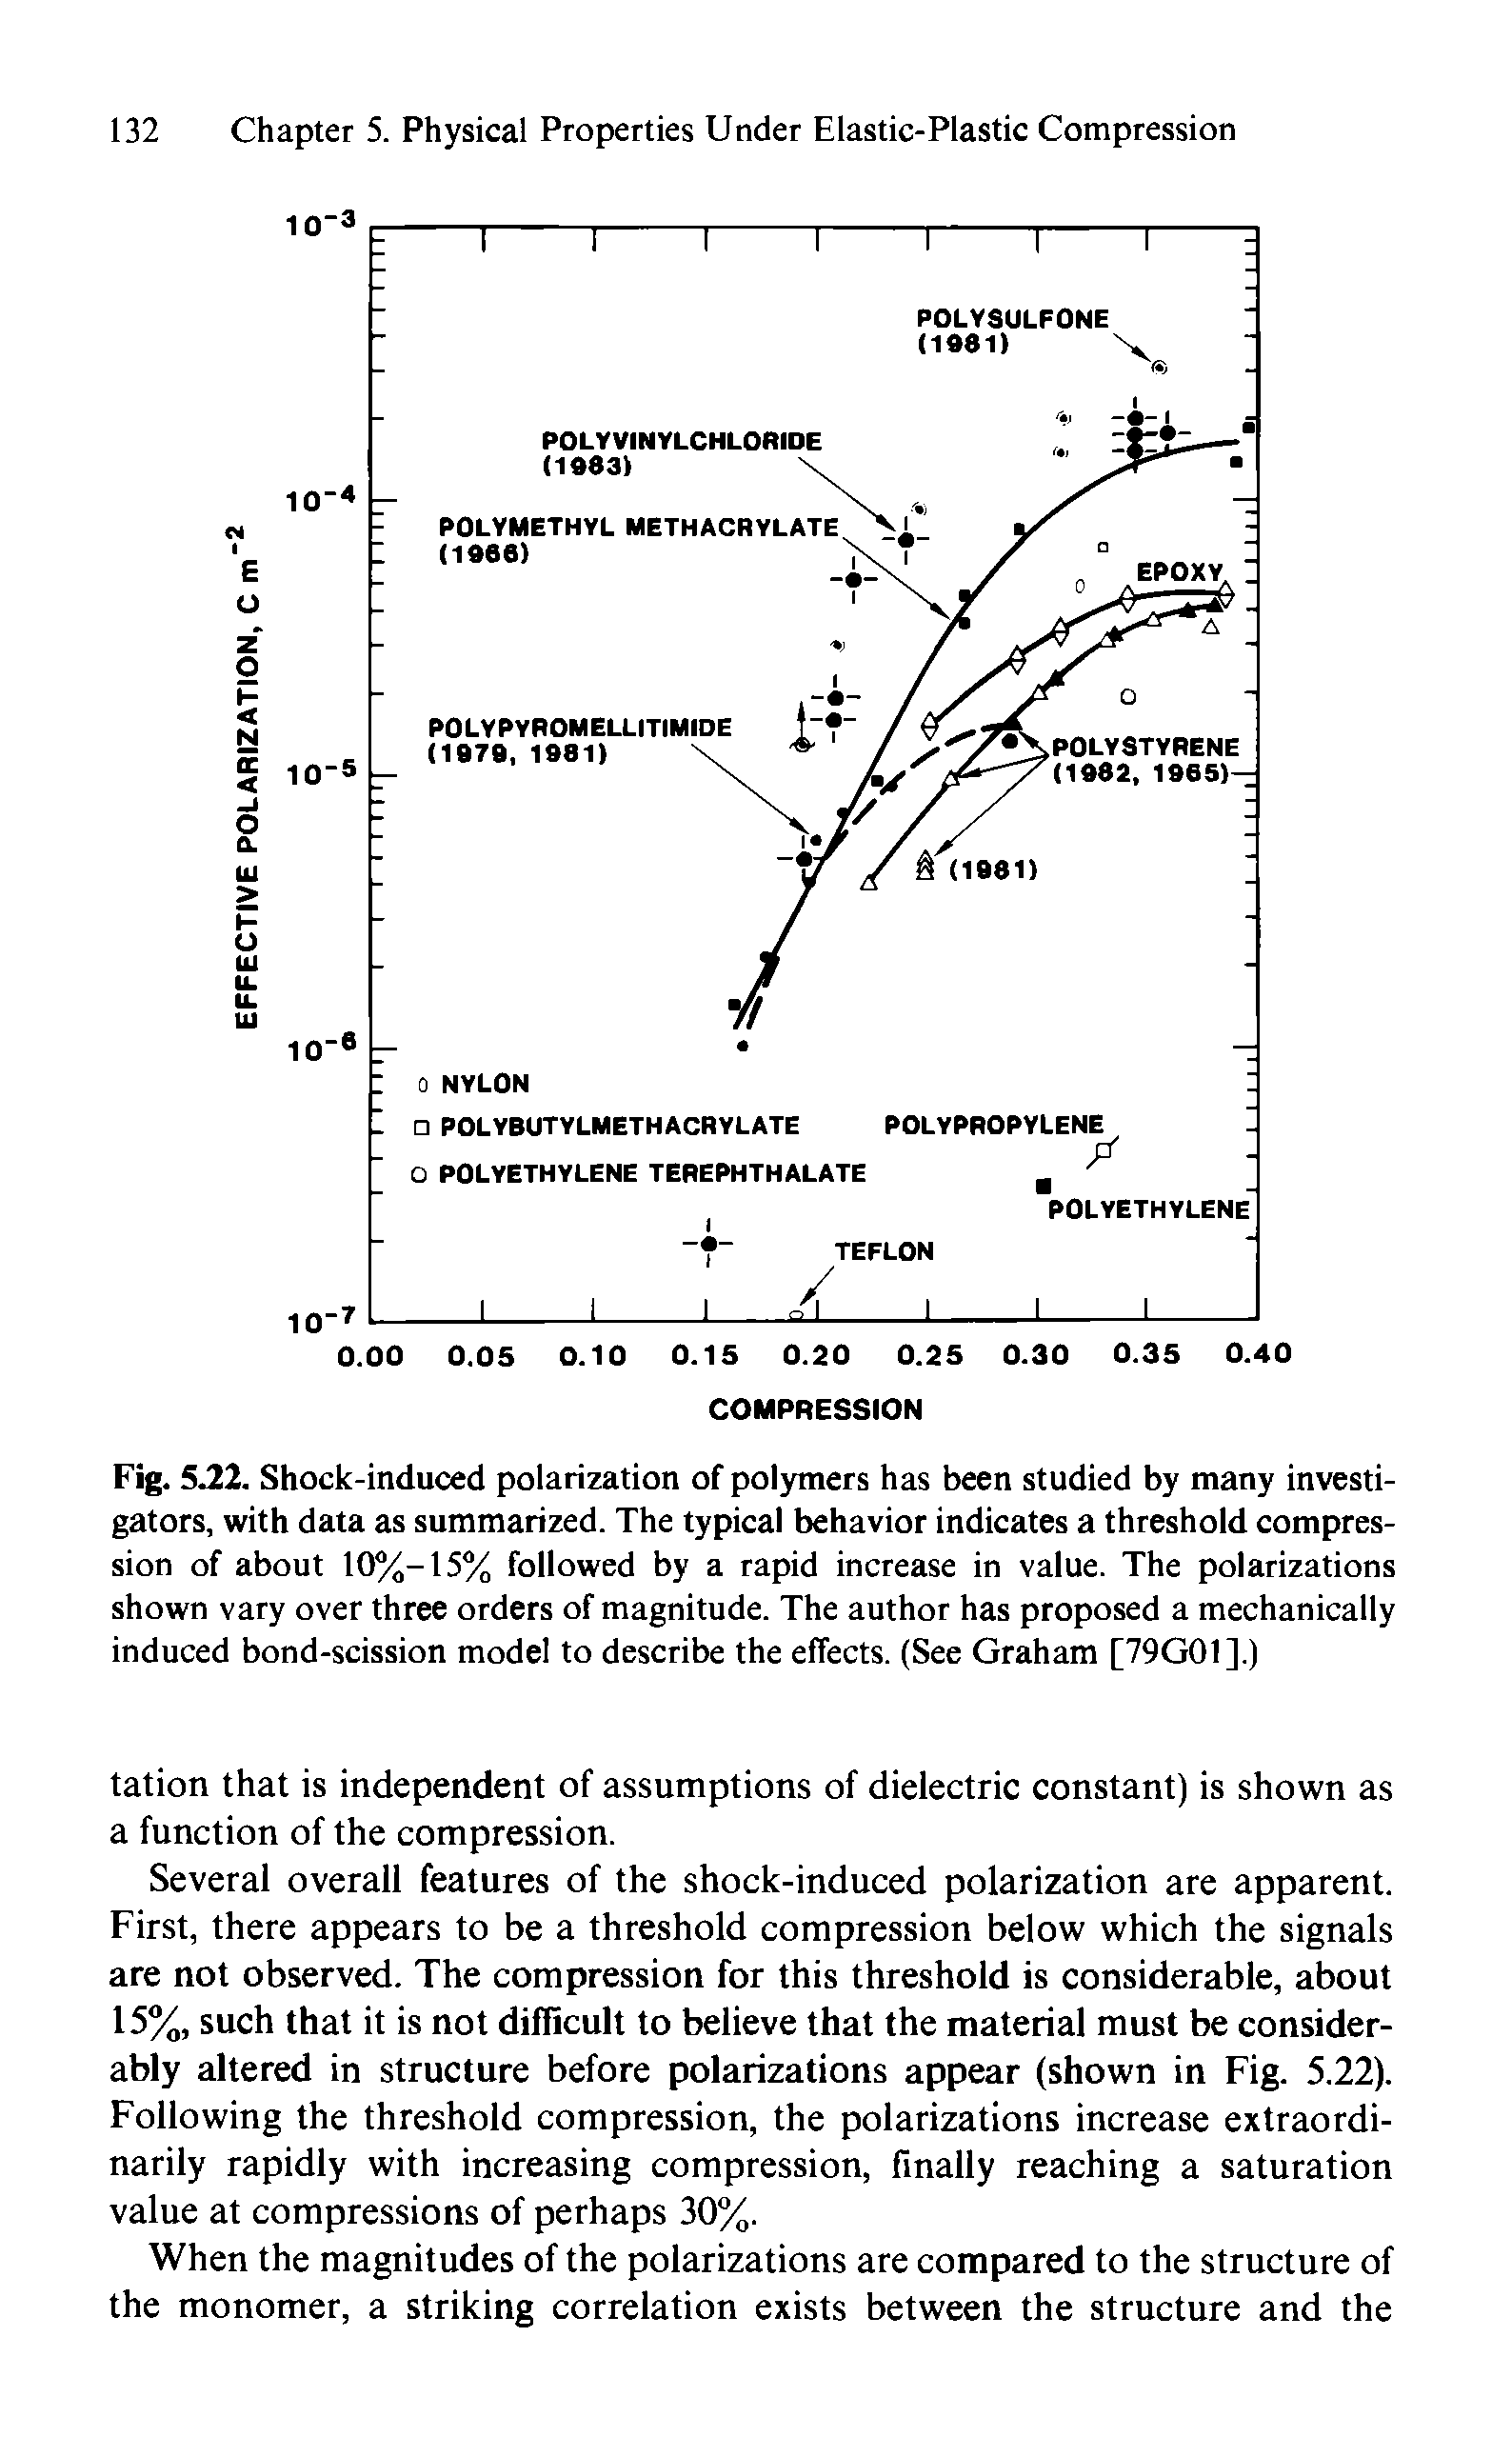 Fig. 5JS2. Shock-induced polarization of polymers has been studied by many investigators, with data as summarized. The typical behavior indicates a threshold compression of about 10%-15% followed by a rapid increase in value. The polarizations shown vary over three orders of magnitude. The author has proposed a mechanically induced bond-scission model to describe the effects. (See Graham [79G01].)...